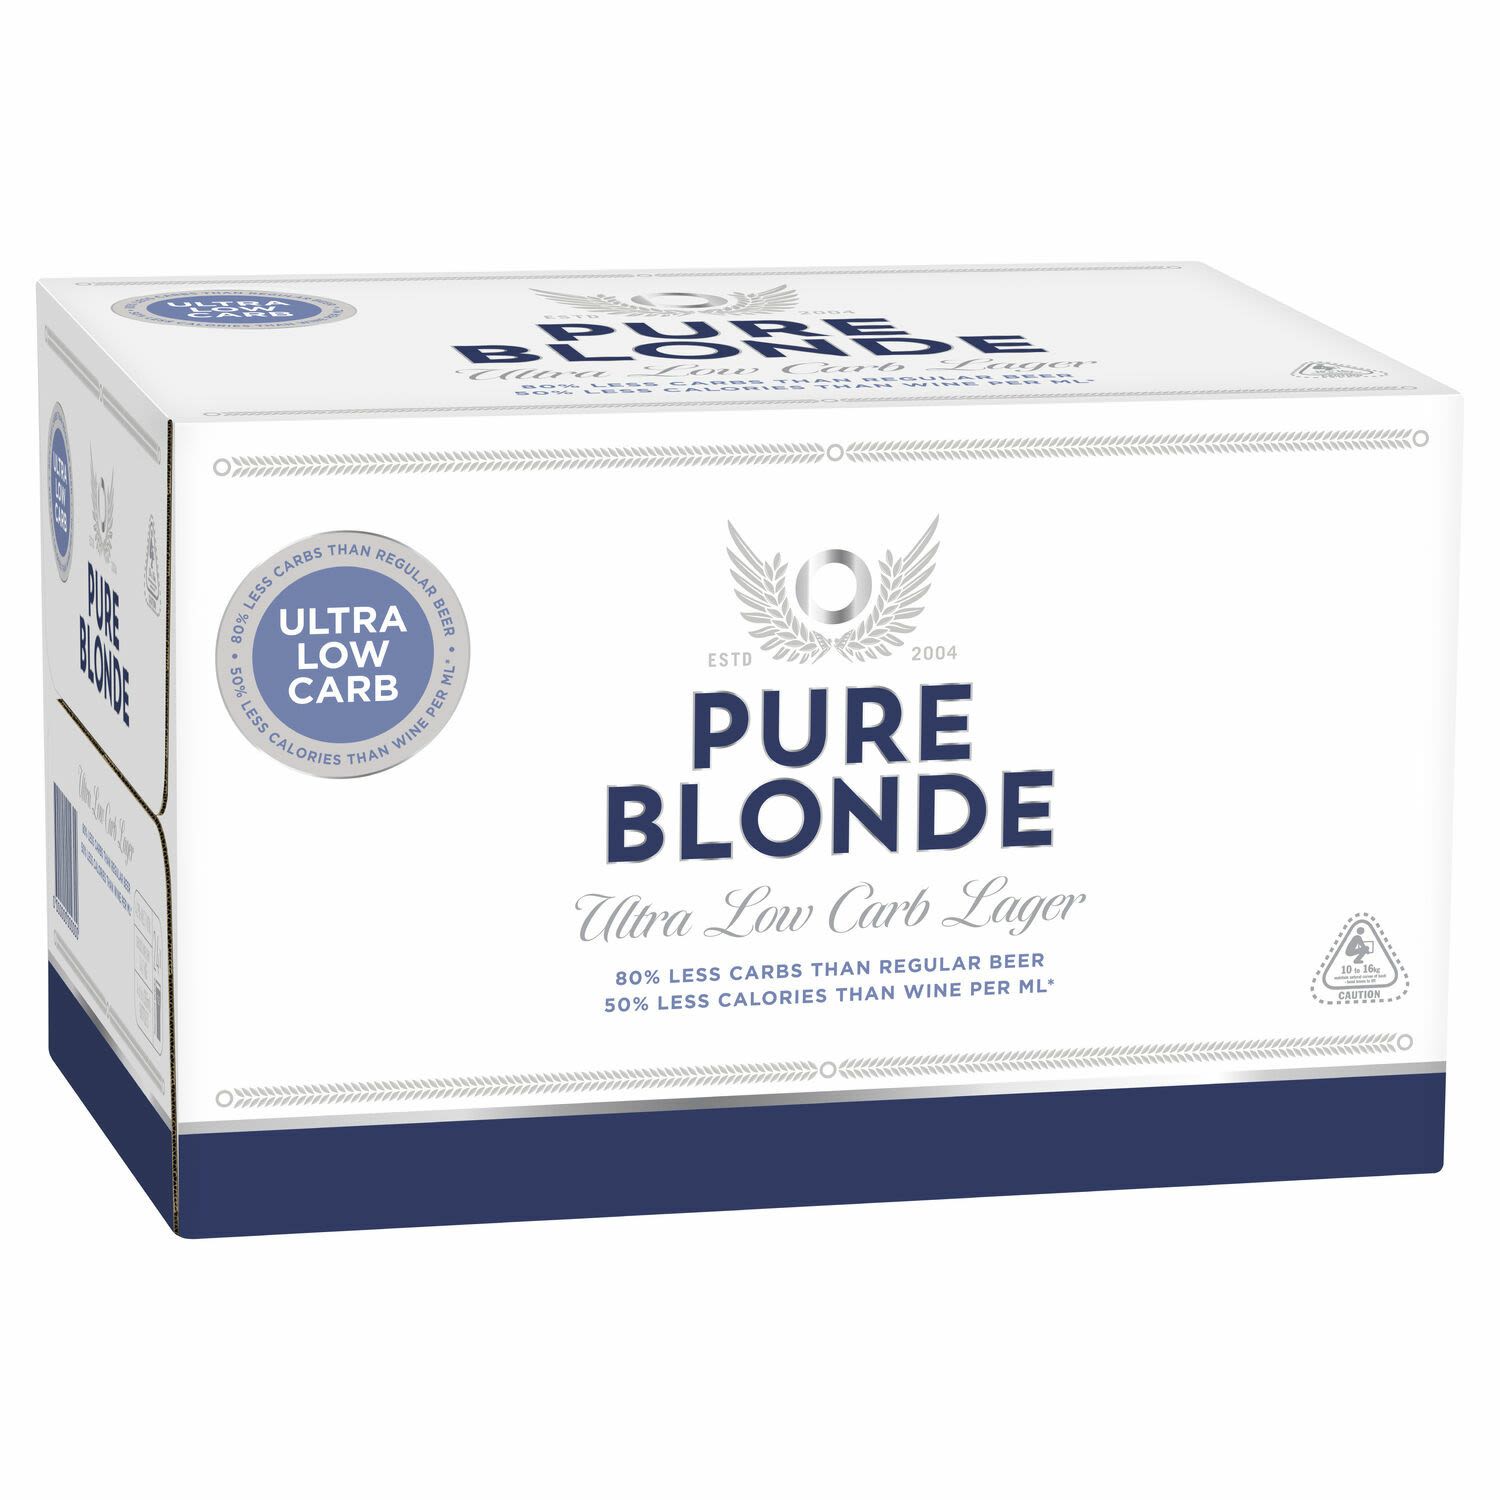 Pure Blonde Bottle 355mL 24 Pack